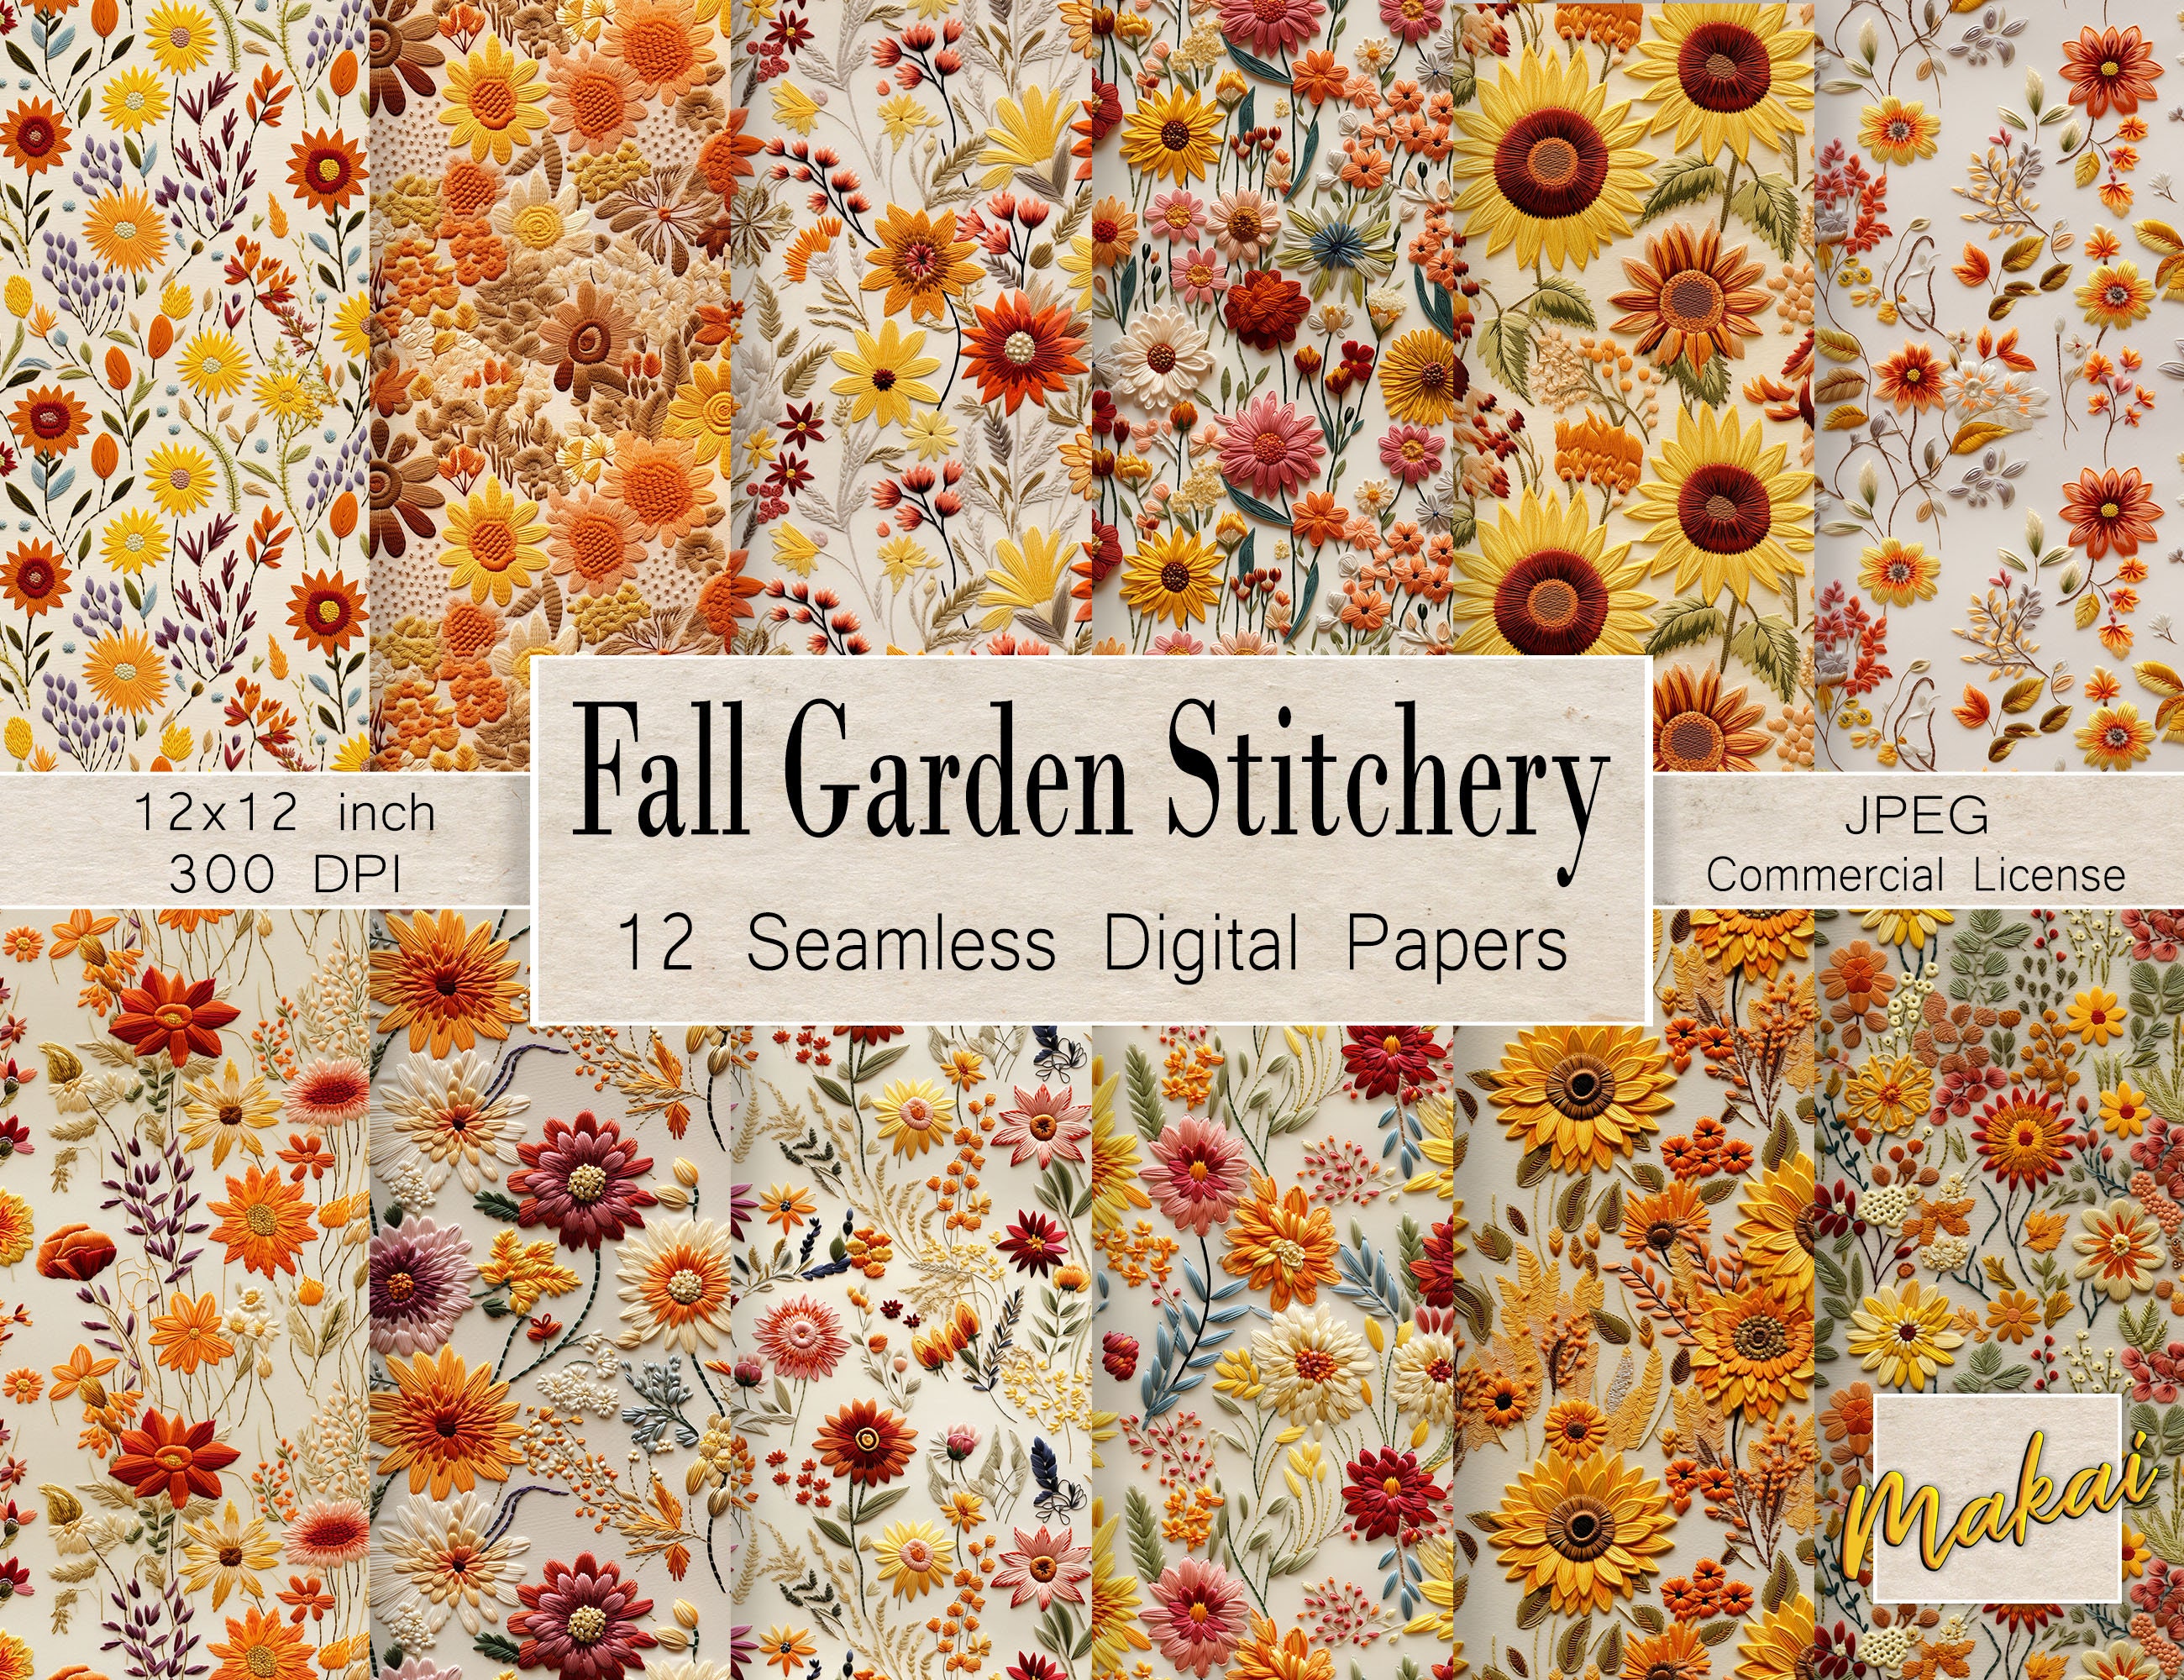 Embroidered Autumn Flowers, 12 Seamless Digital Patterns, Use for